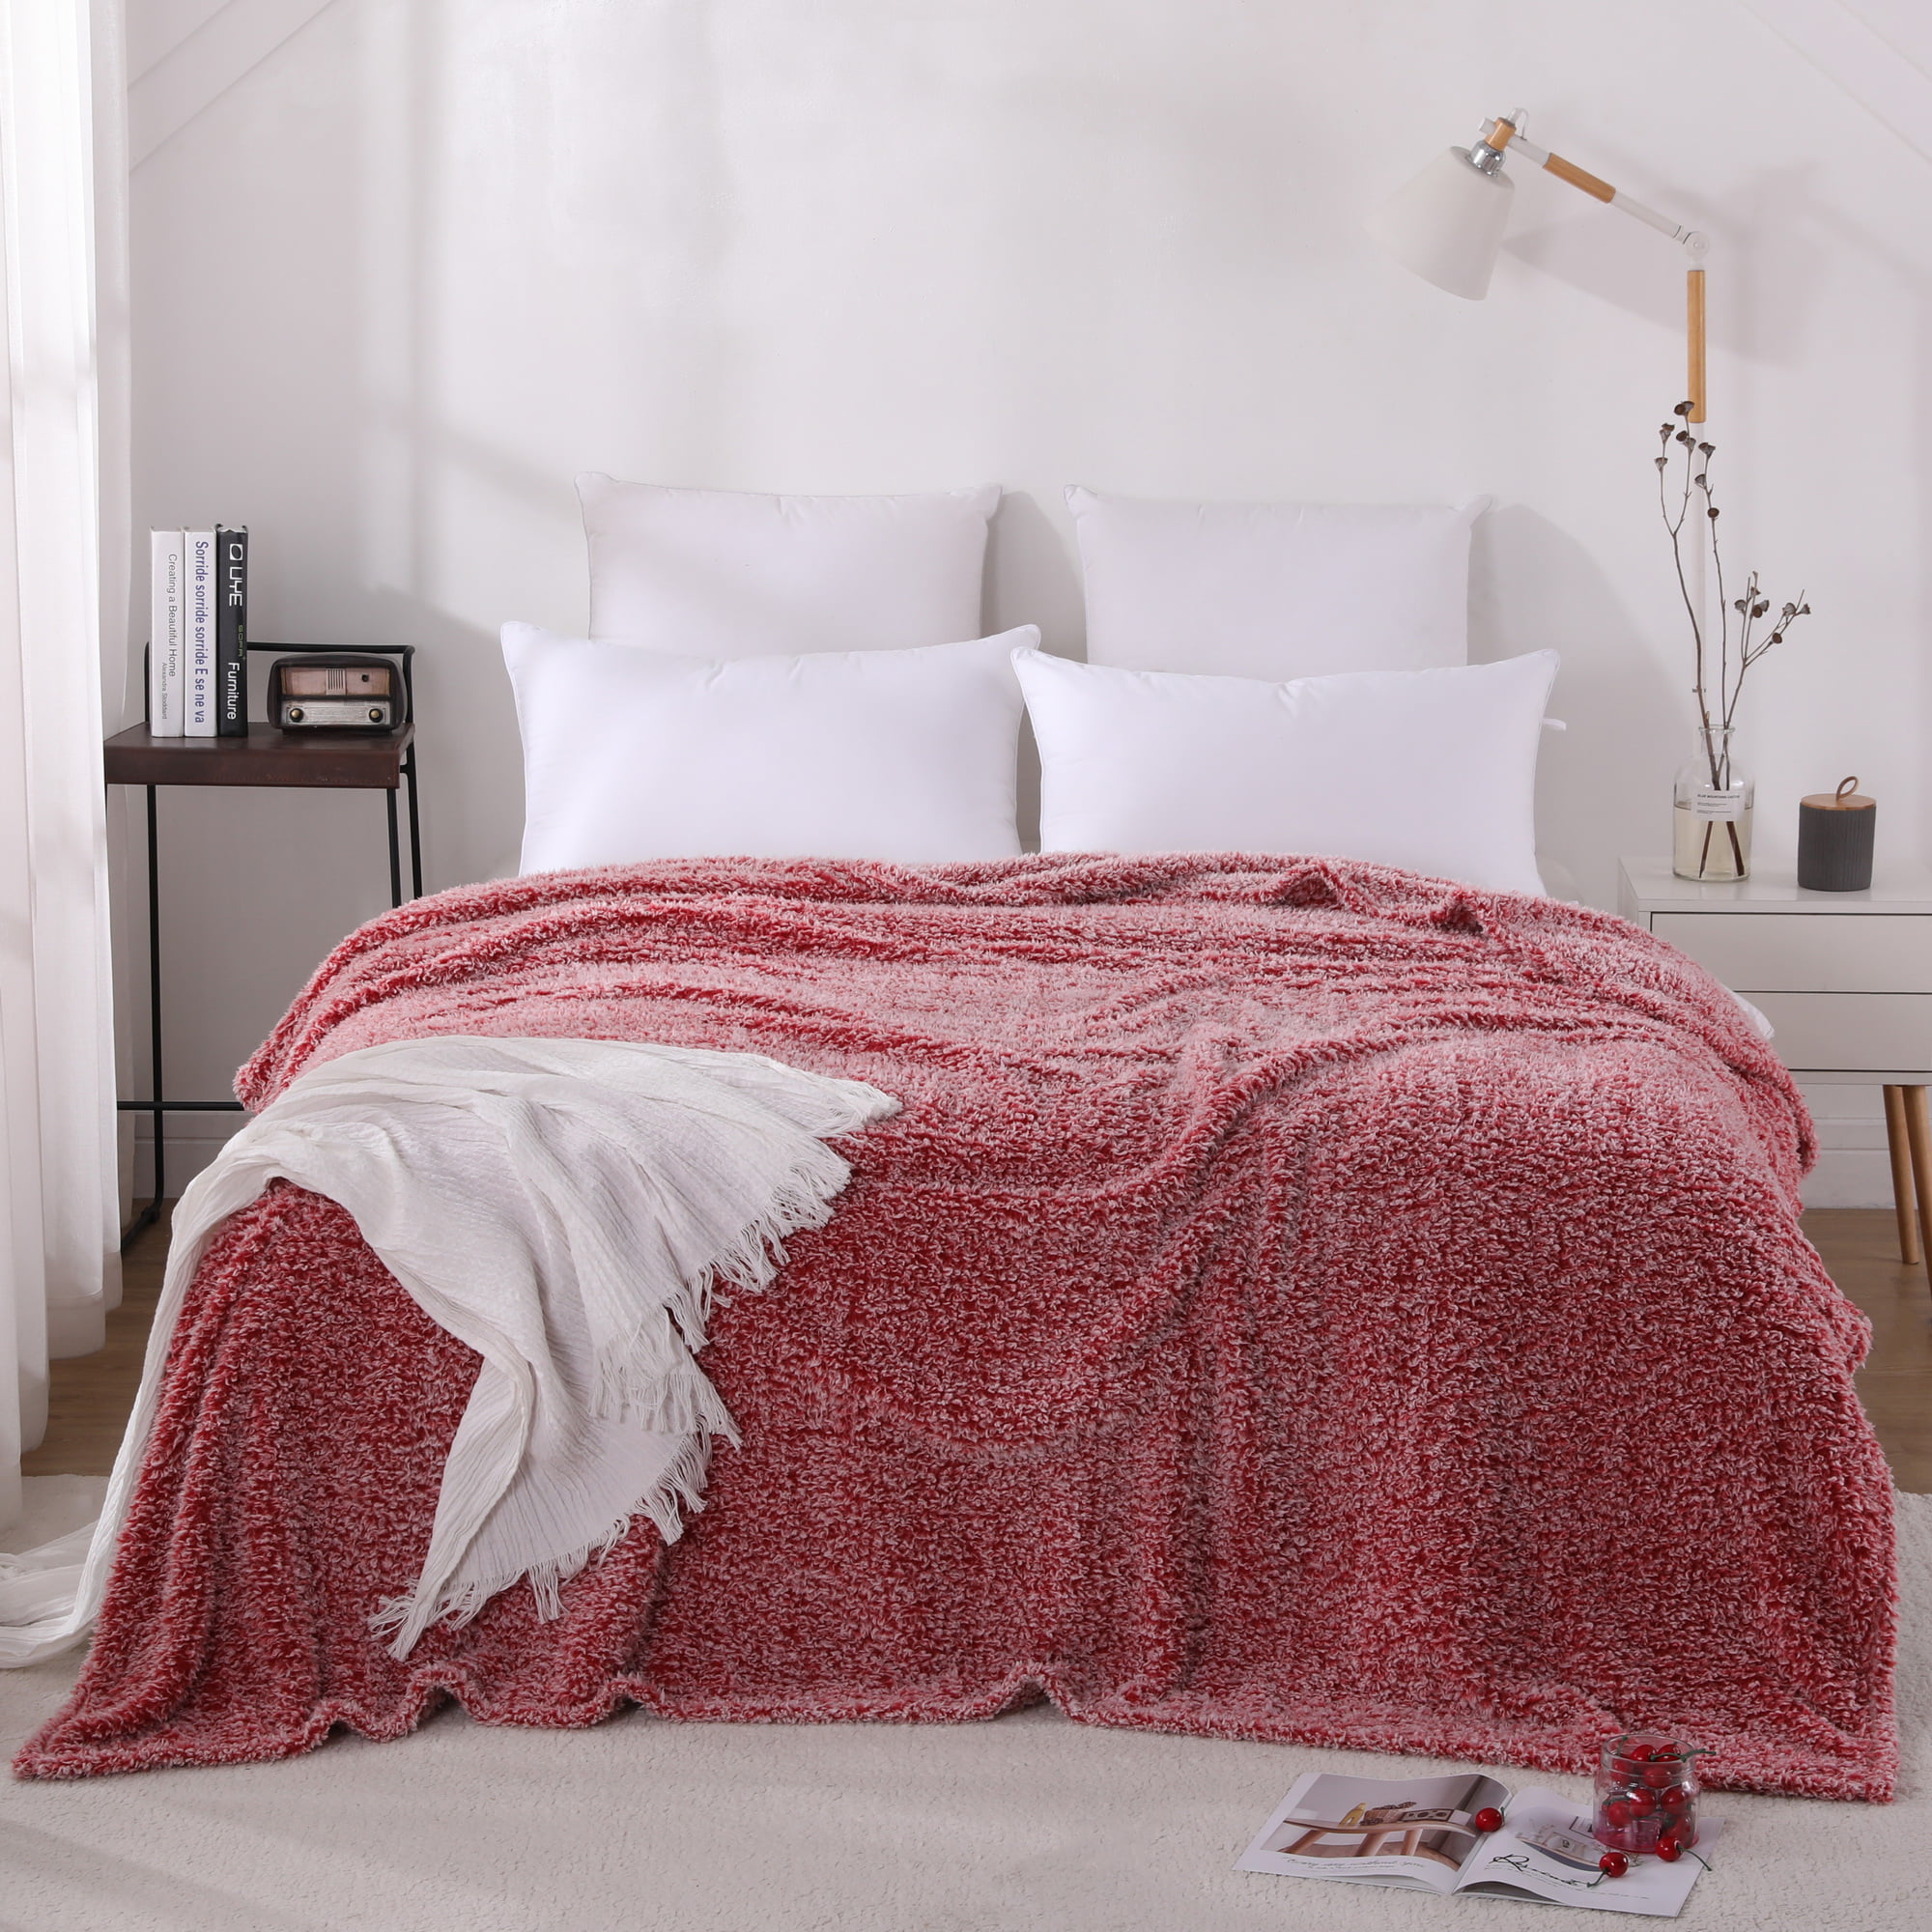 Details about   Mainstays Sherpa Bed Blanket Full/Queen/King Sizes